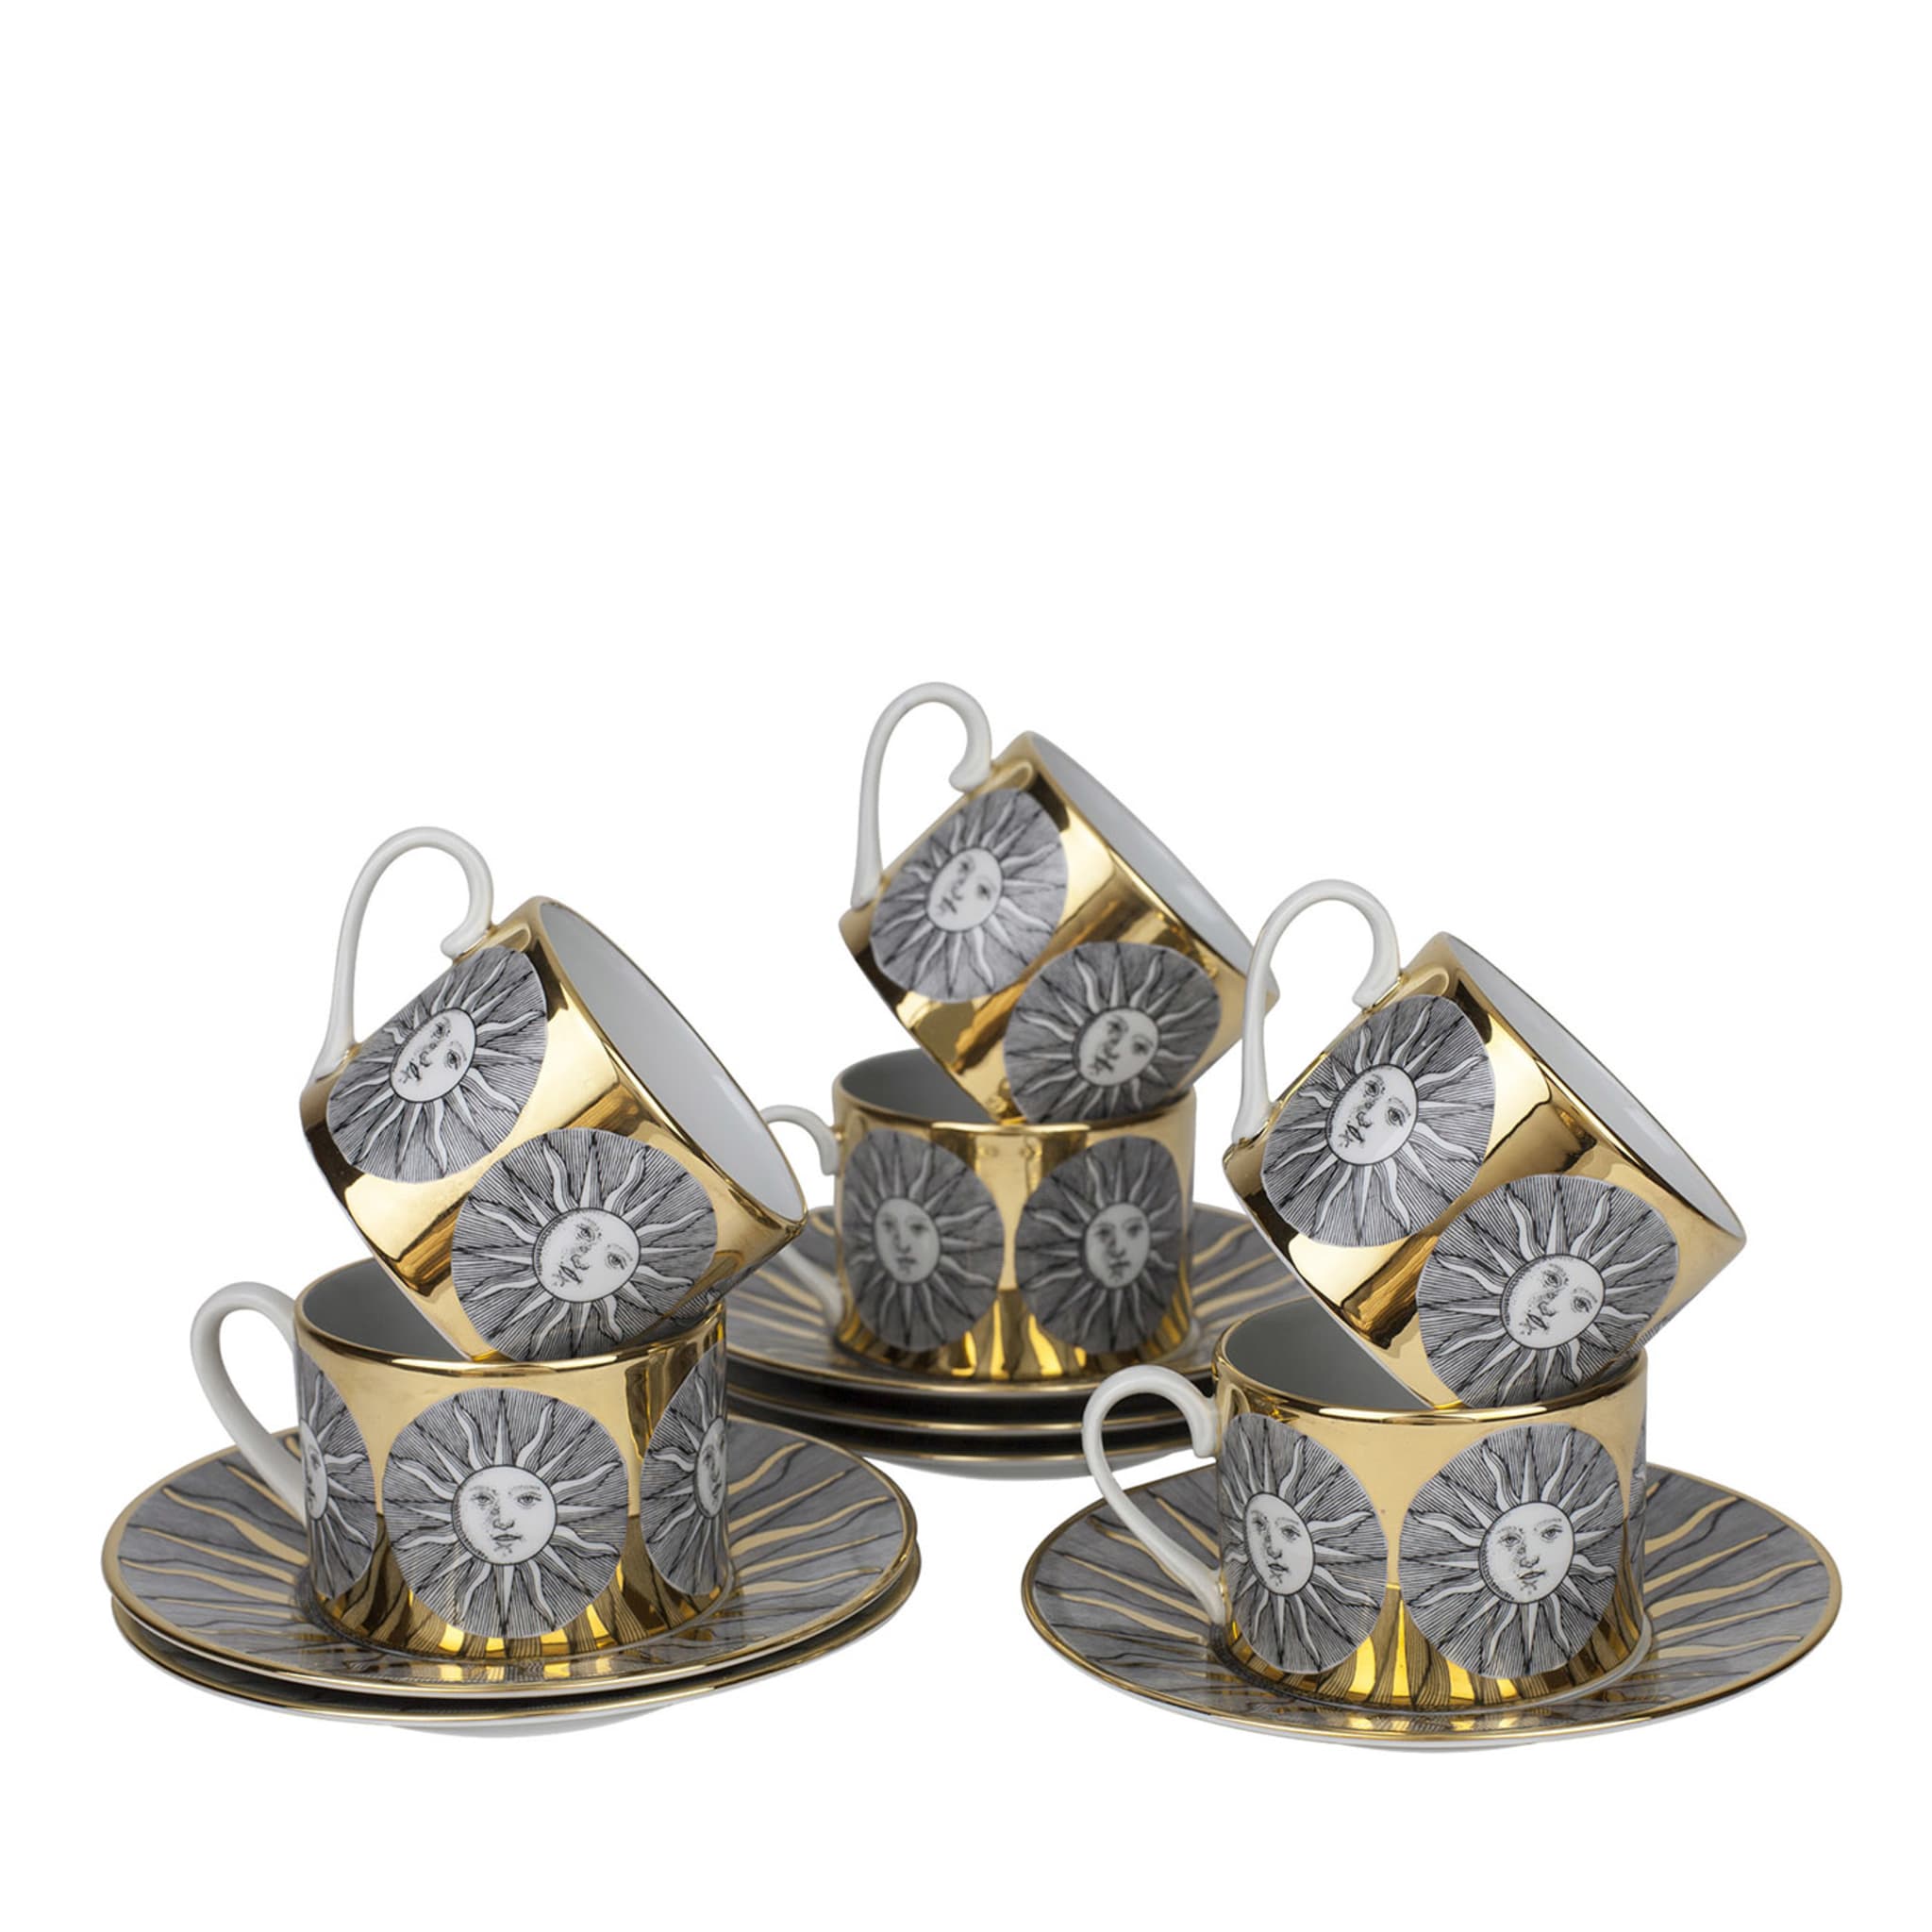 Set of 6 Sole Tea Cups - Main view